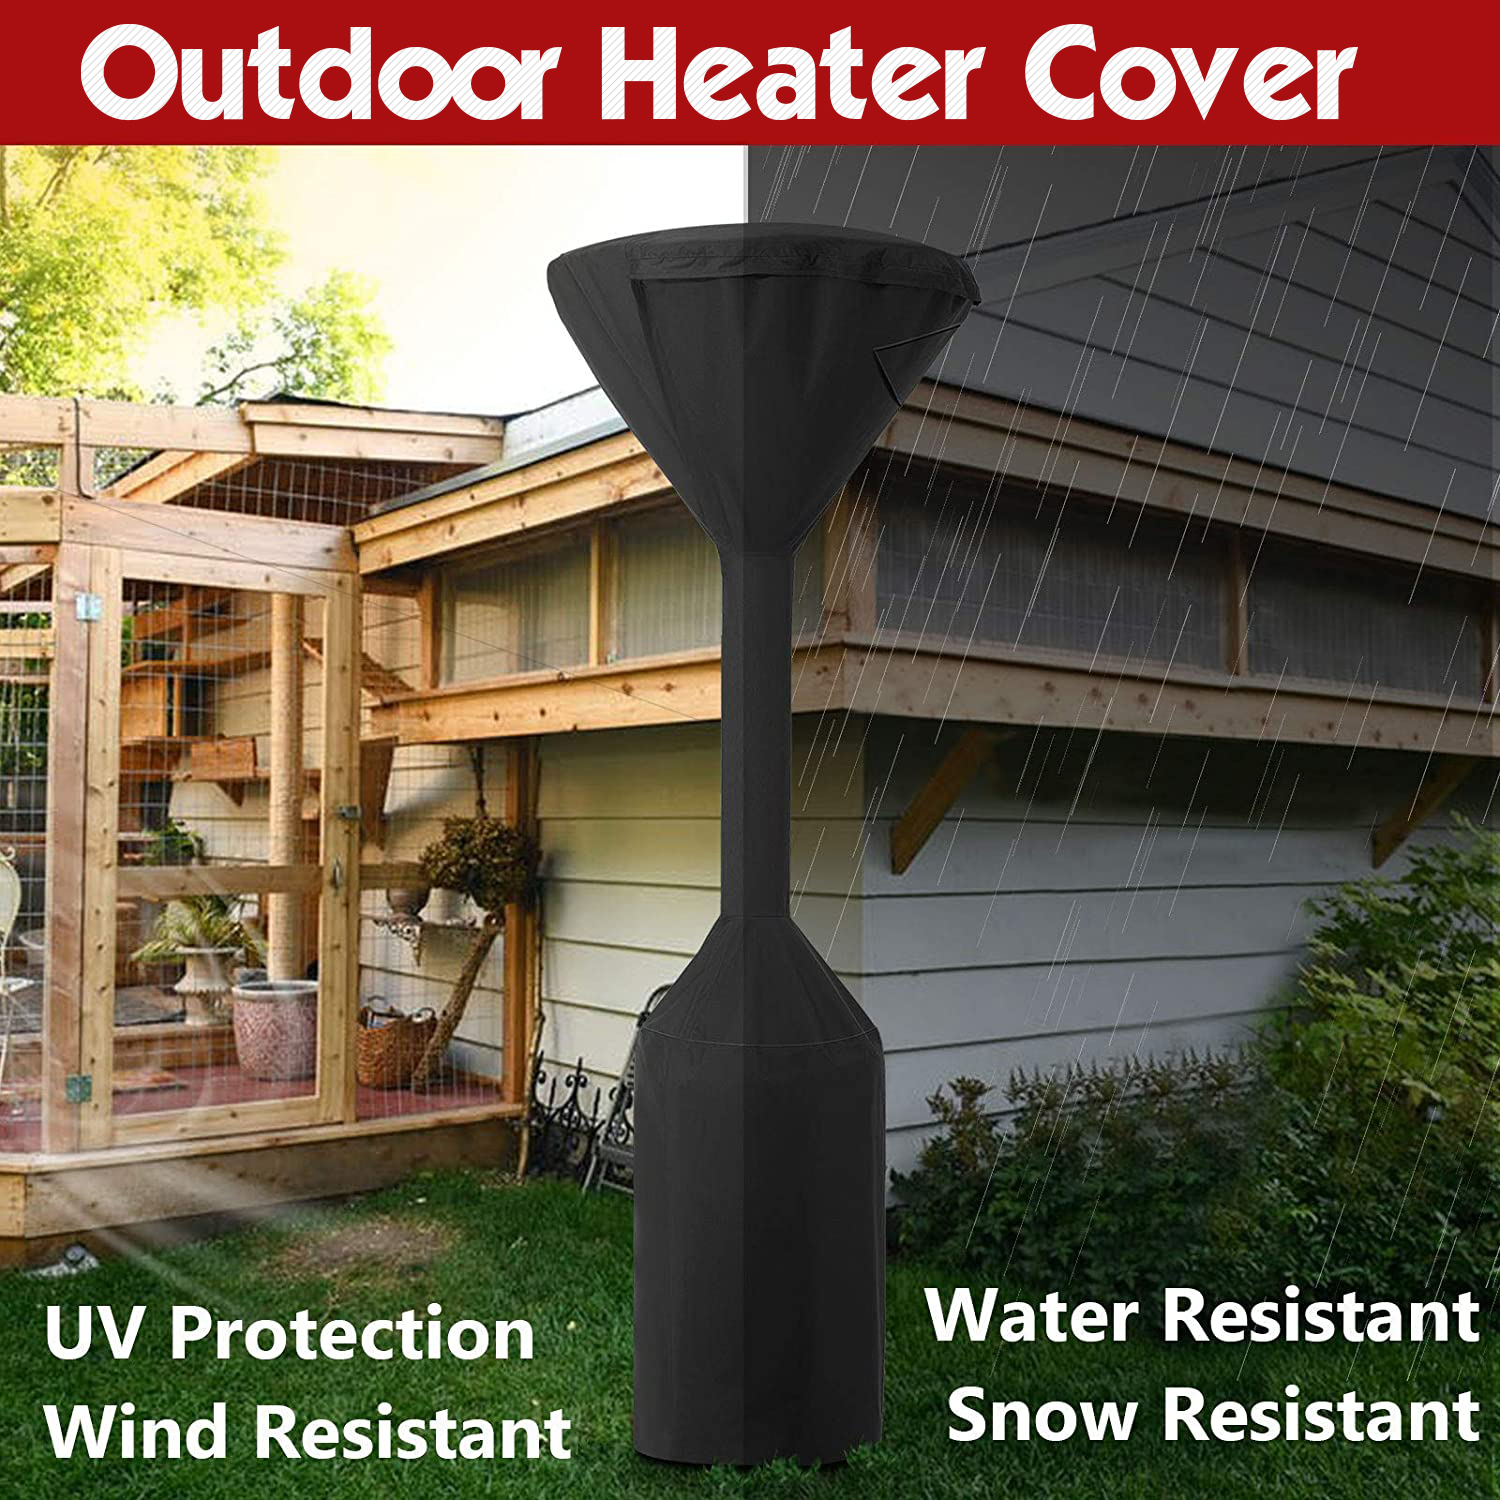 KING-DO-WAY-600D-Polyester-Black-Outdoor-Heater-Cover-Ventilation-Design-Easy-to-Clean-Heater-Cover-1892004-3